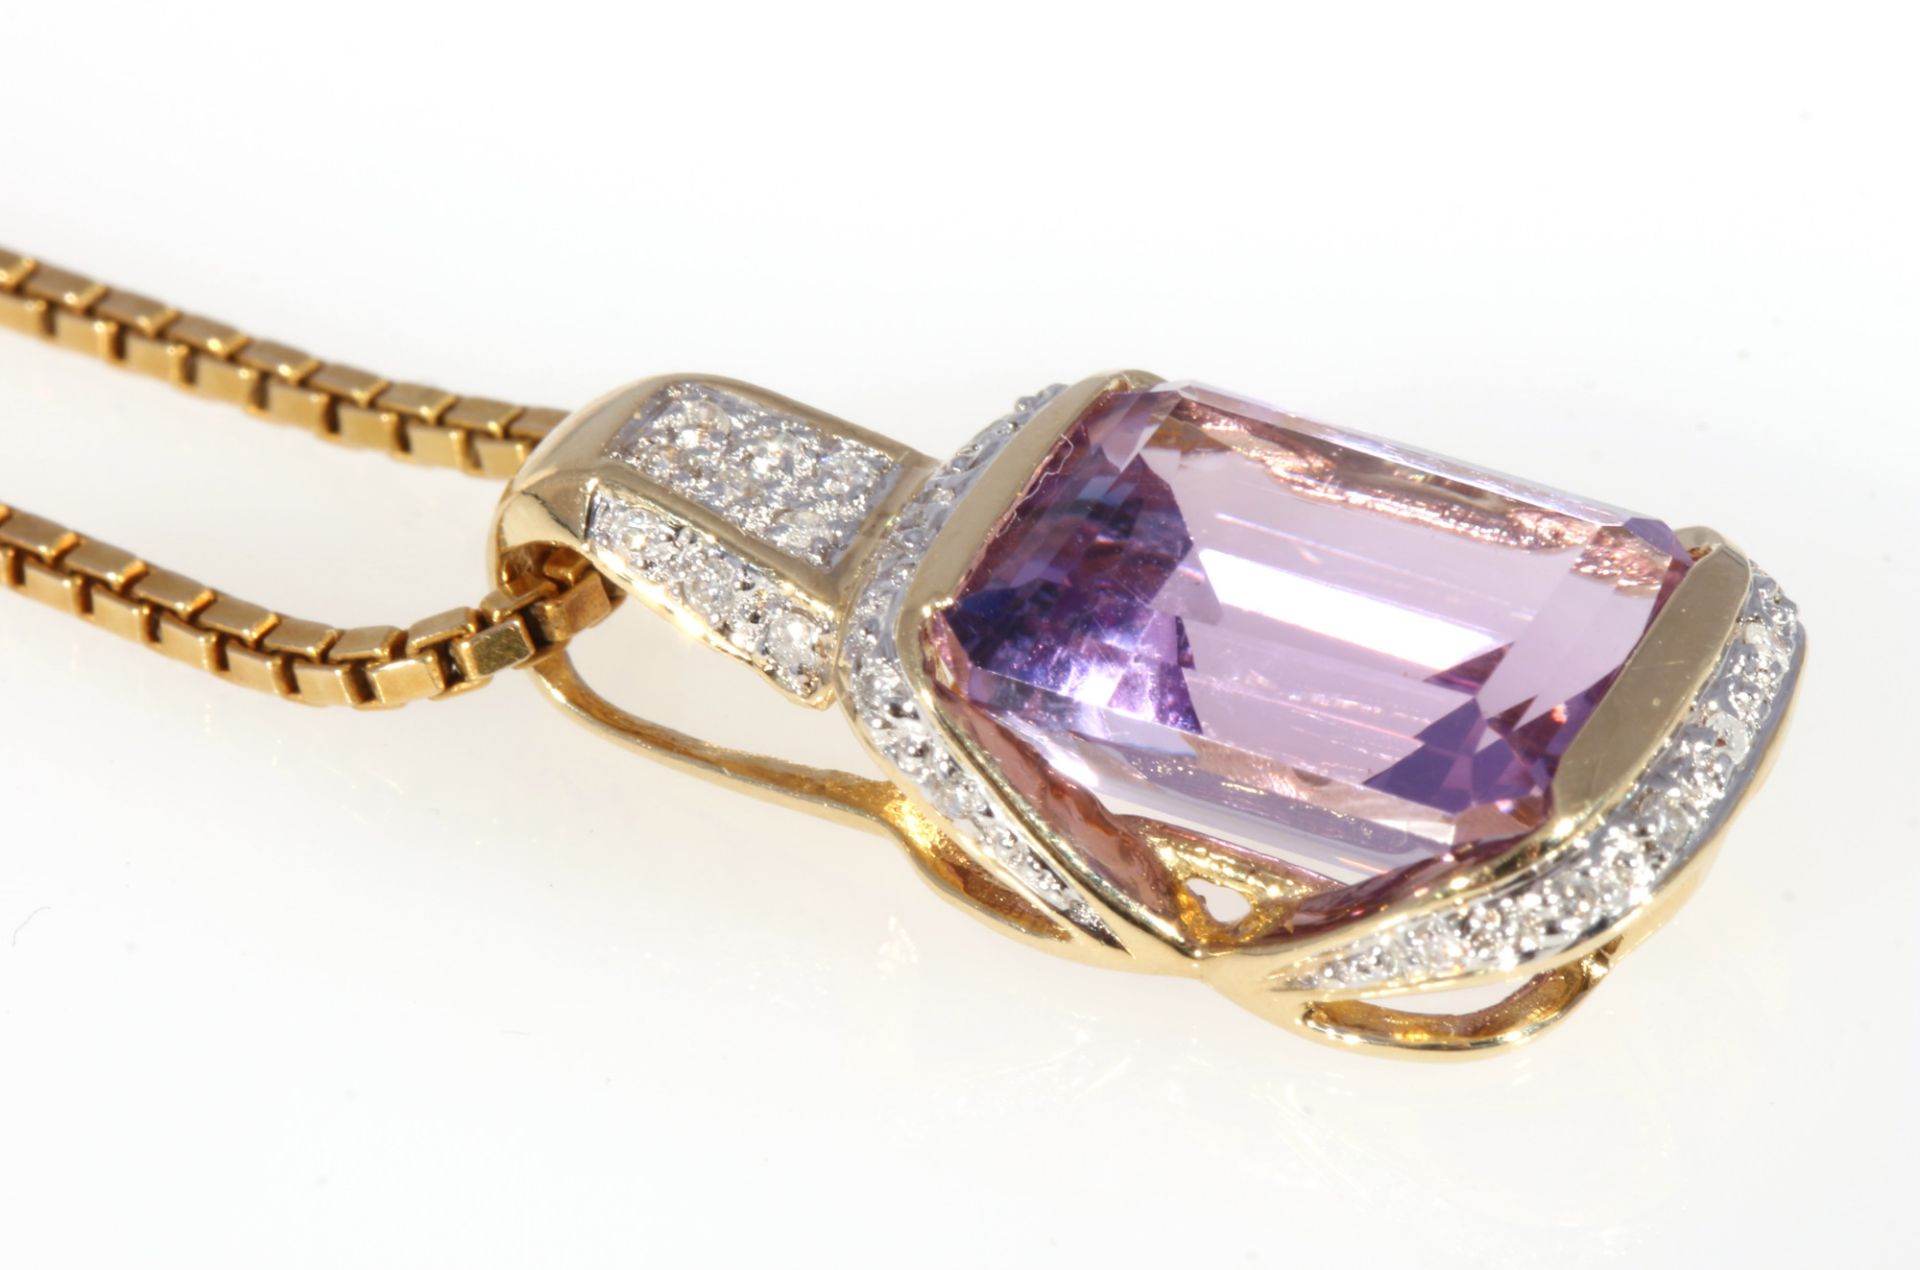 585 gold amethyst pendant with diamonds and 585 gold chain, 14K Gold Anhänger Amethyst mit Brillante - Image 3 of 6